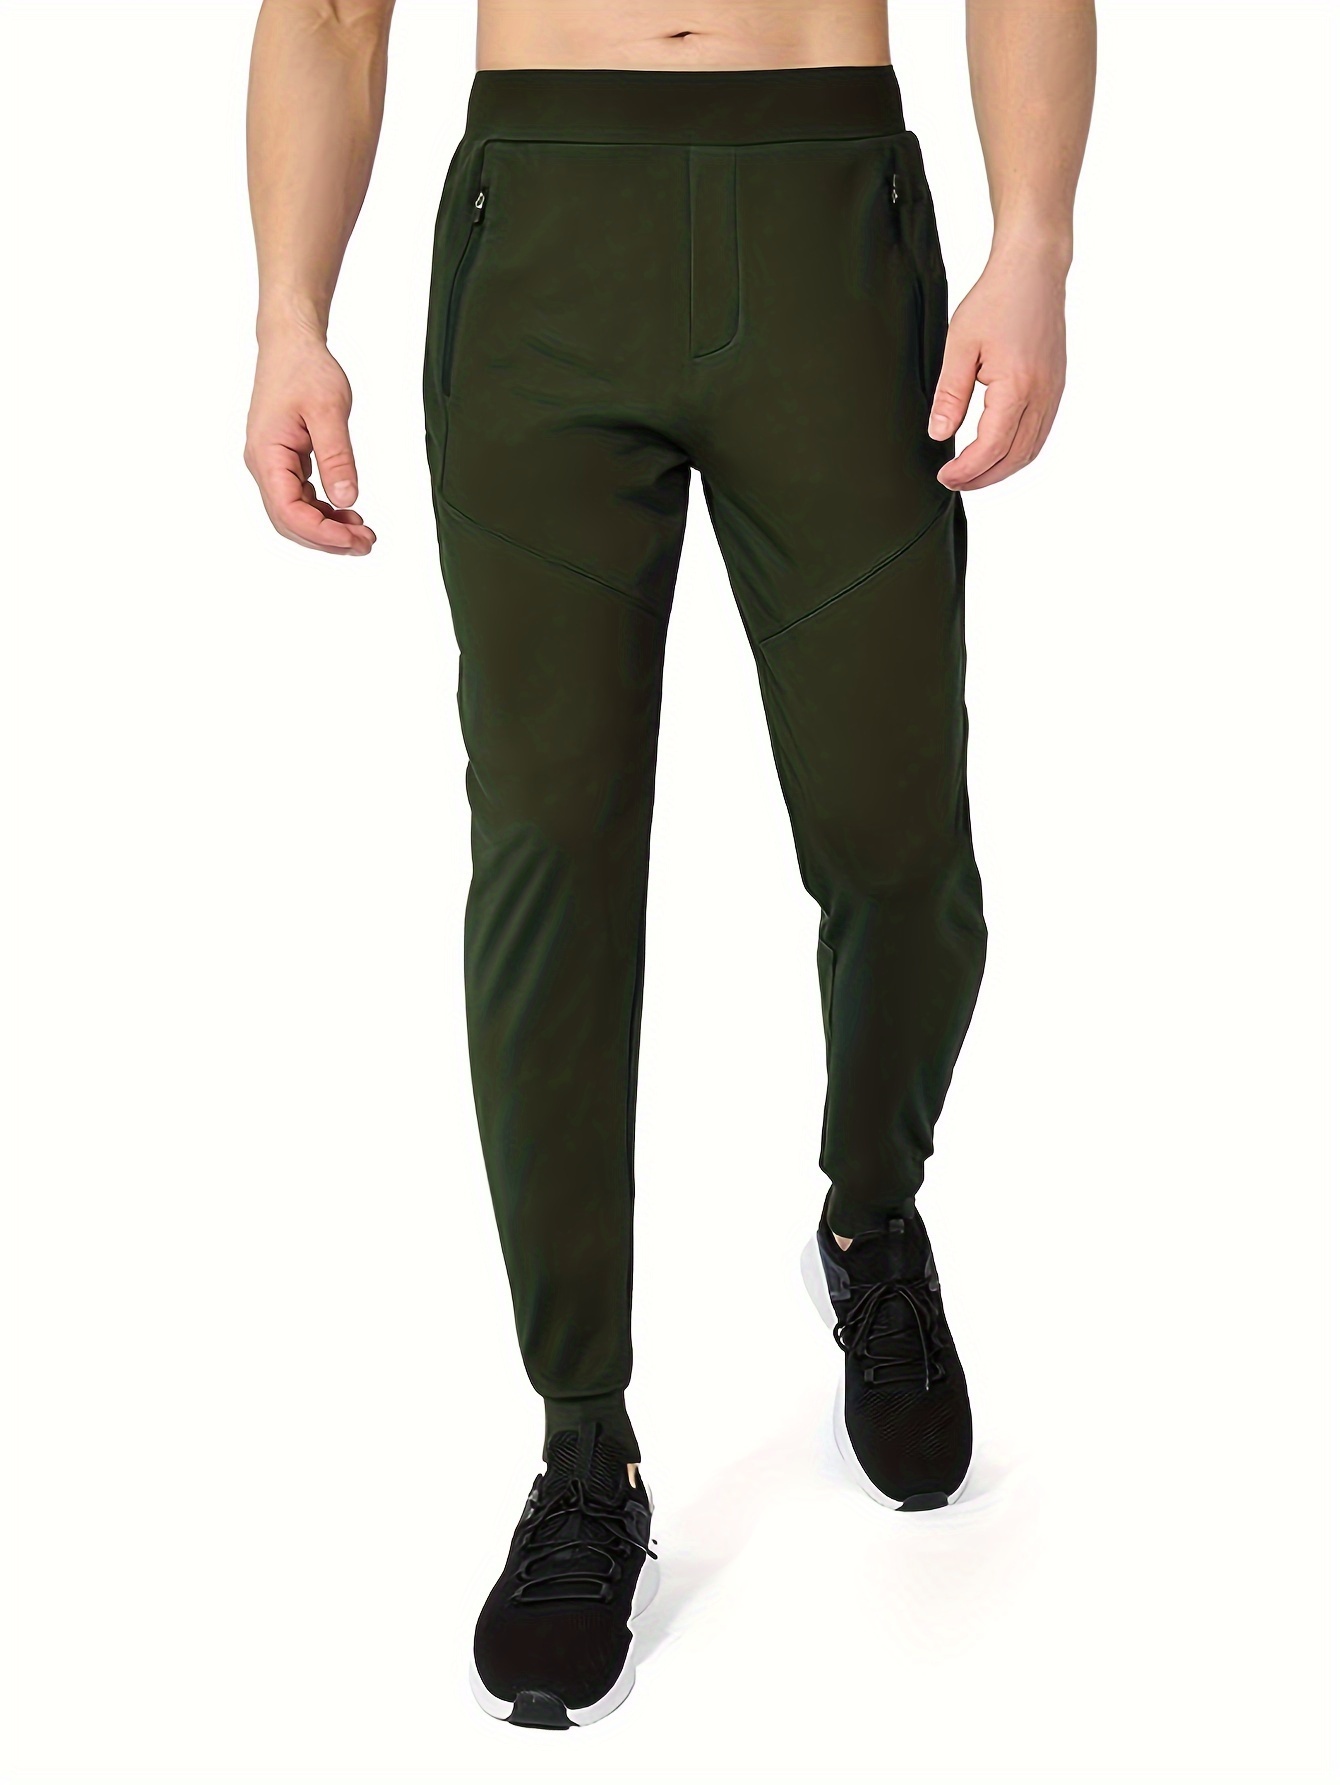 Men Dry 500 breathable running trousers - green